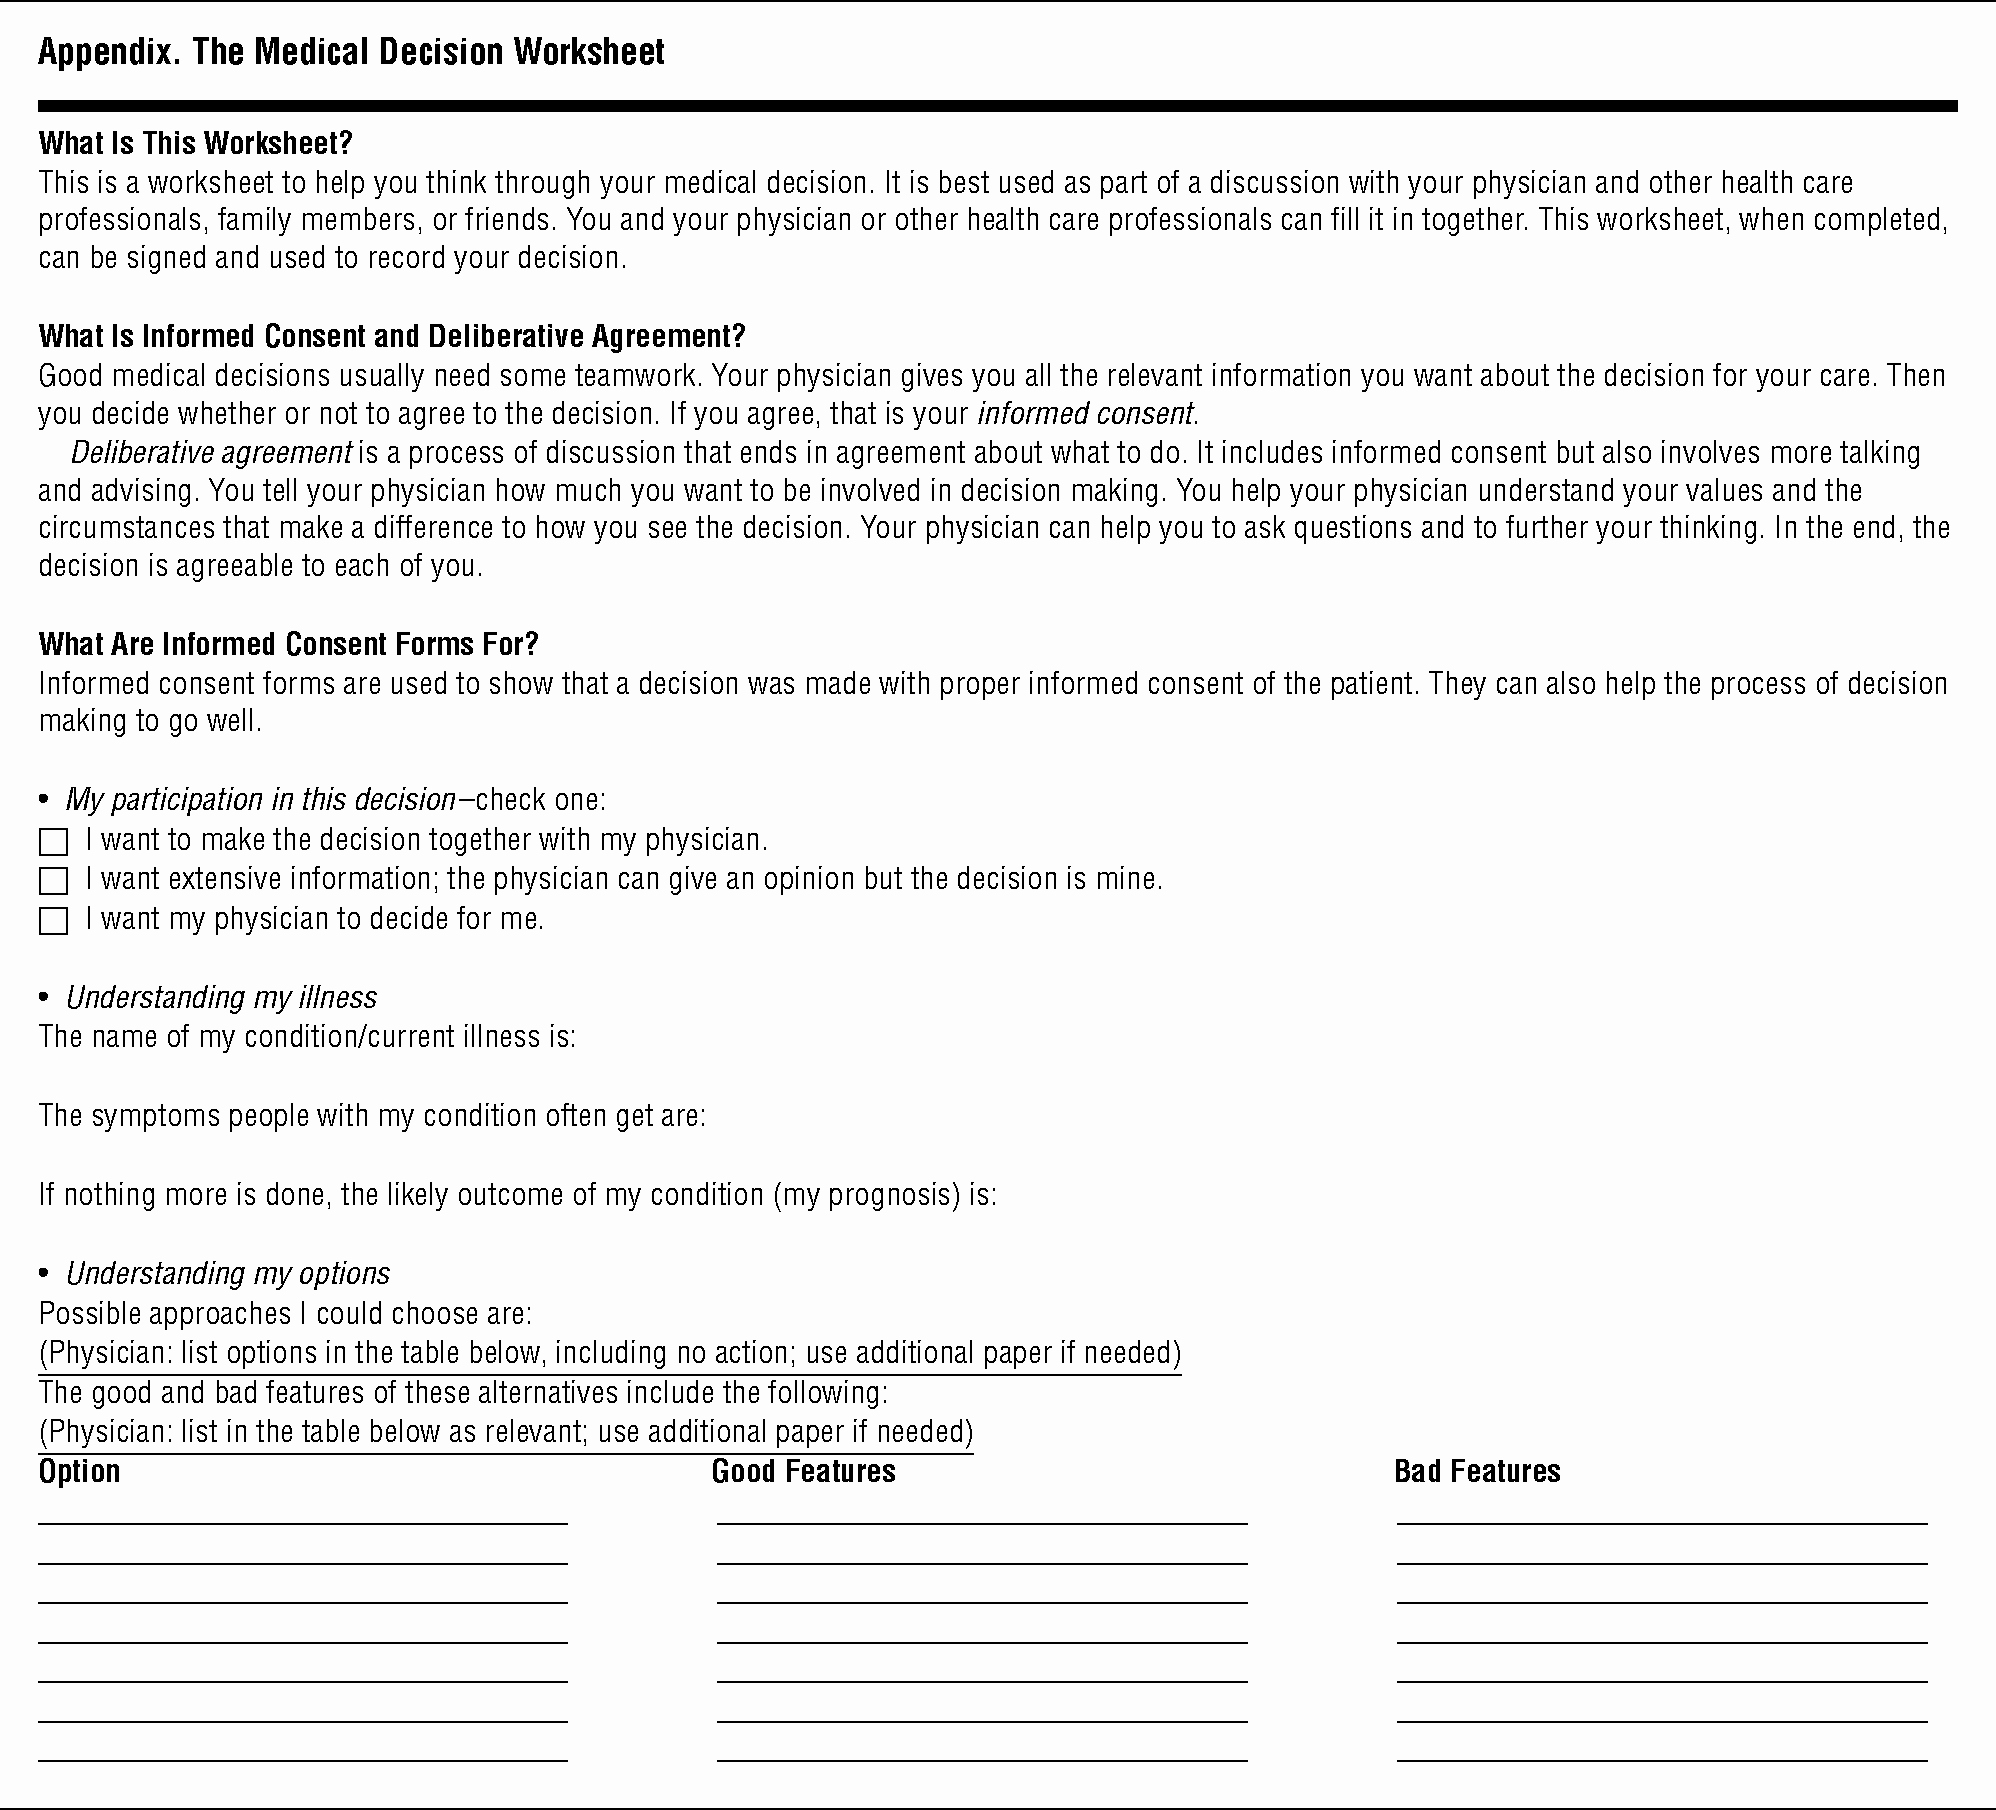 Procedure Consent form New Hospital Informed Consent for Procedure forms